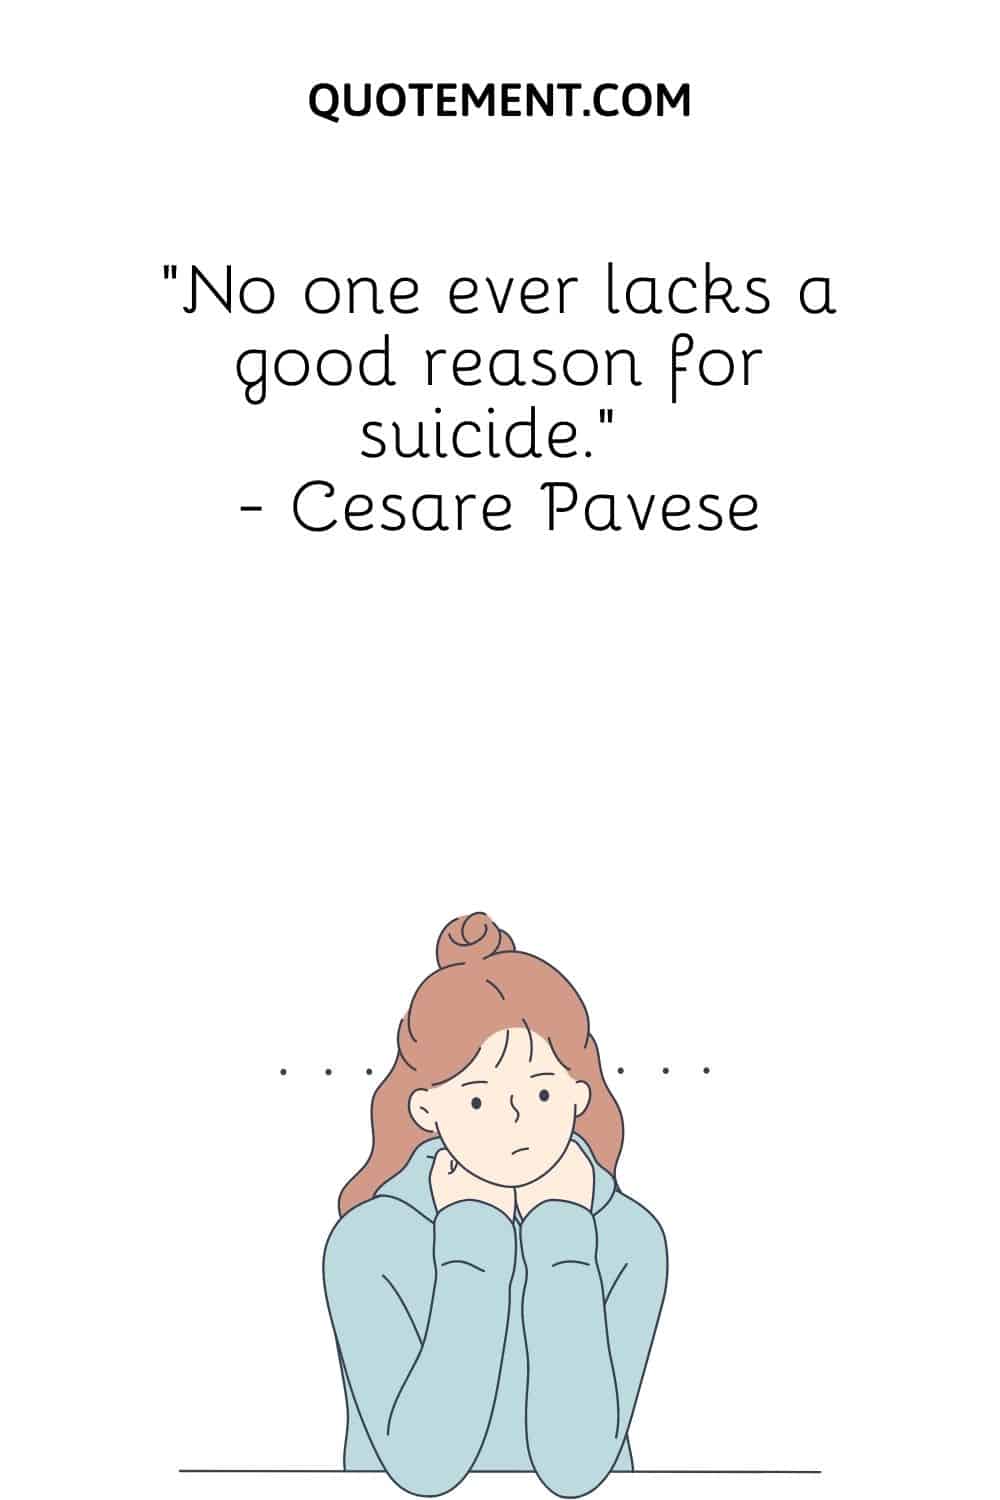 No one ever lacks a good reason for suicide